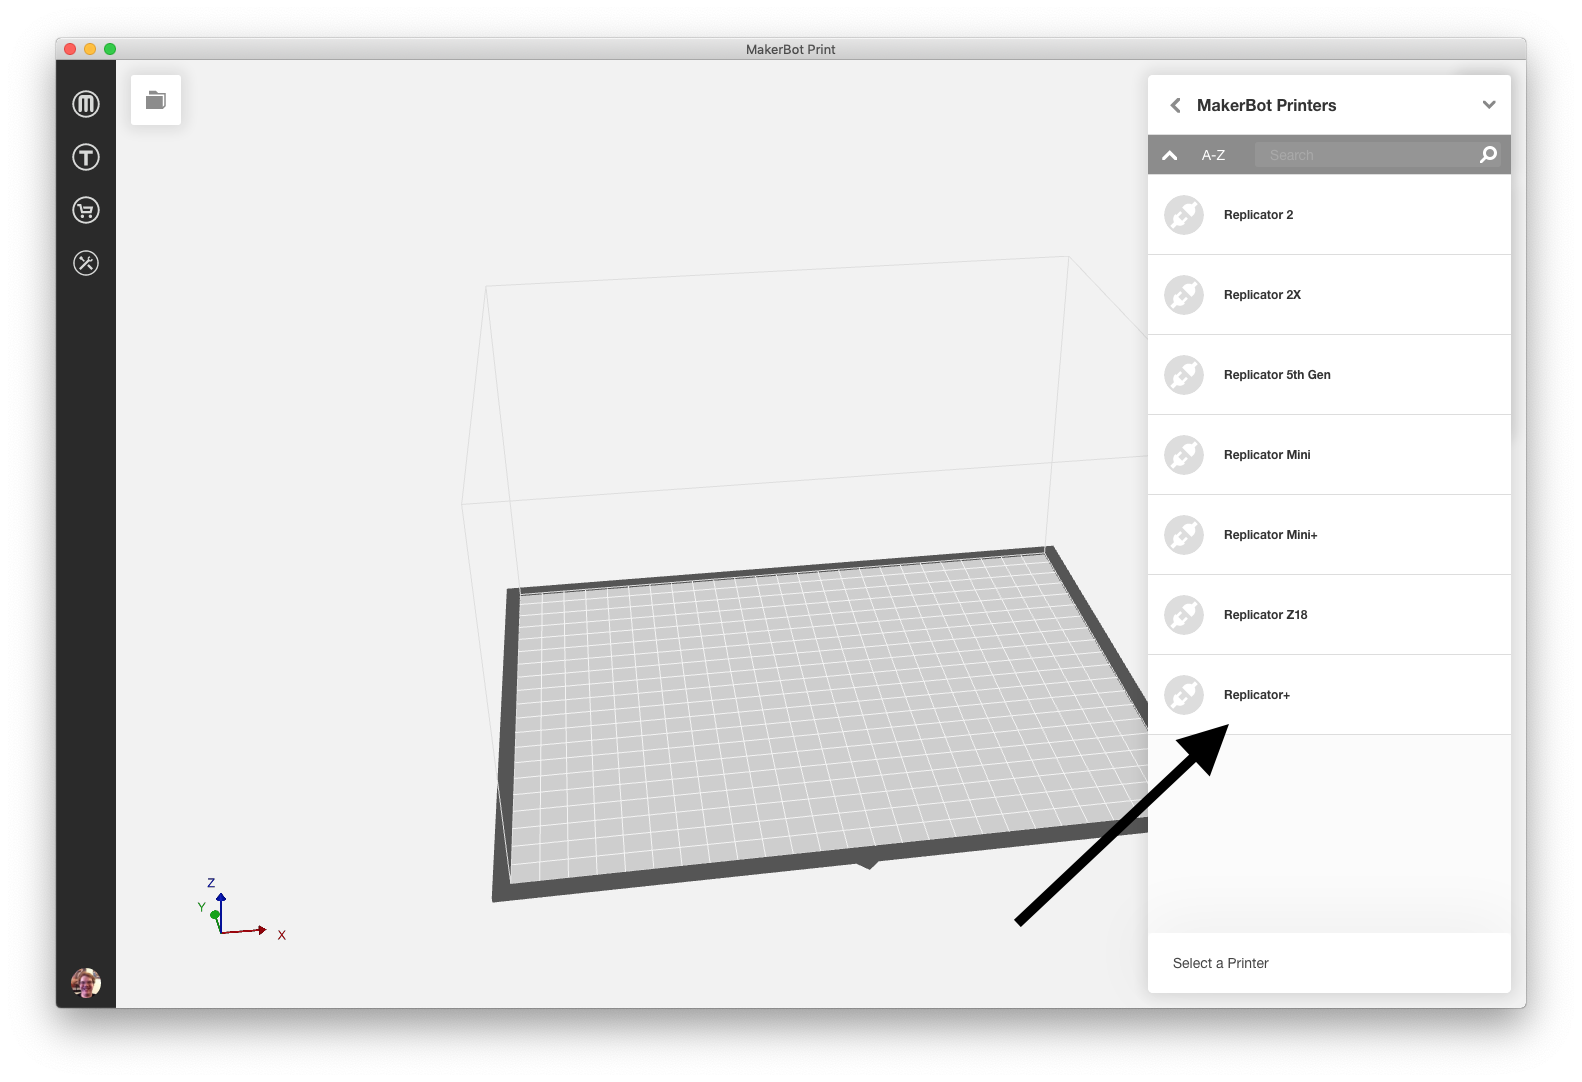 A screenshot of the Makerbot Print Application with an arrow pointing to the "Replicator +" printer option to select it